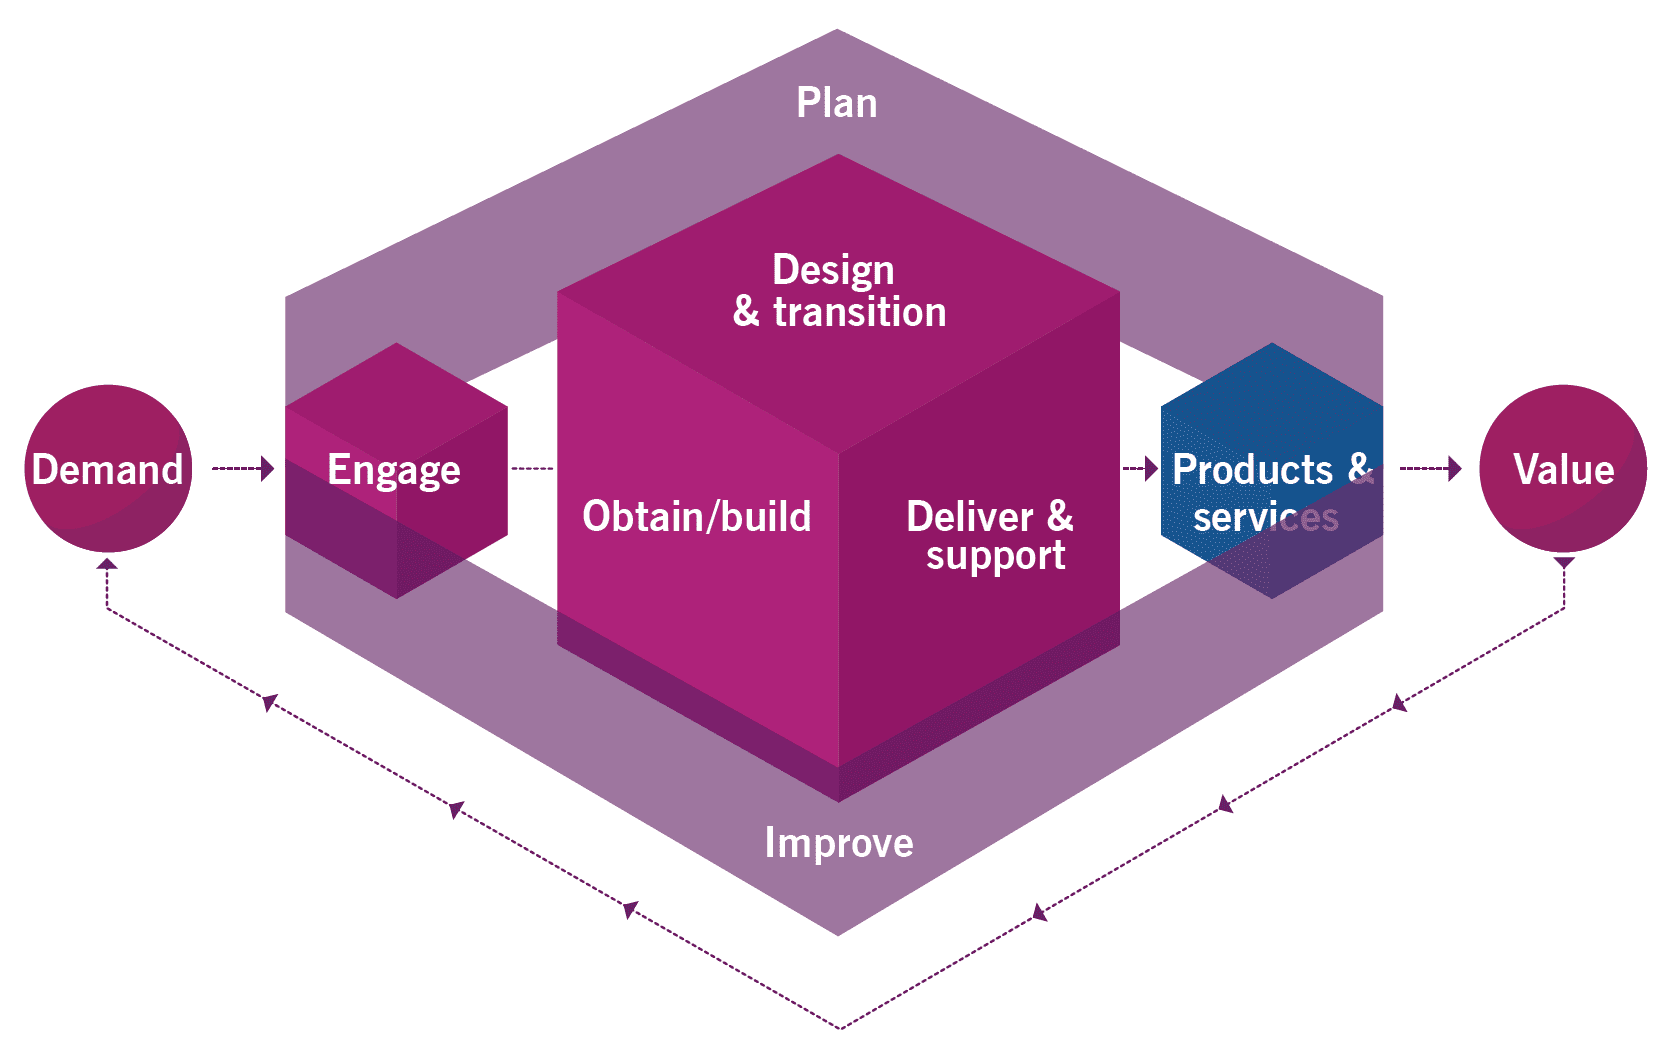 Service value chain in ITIL 4